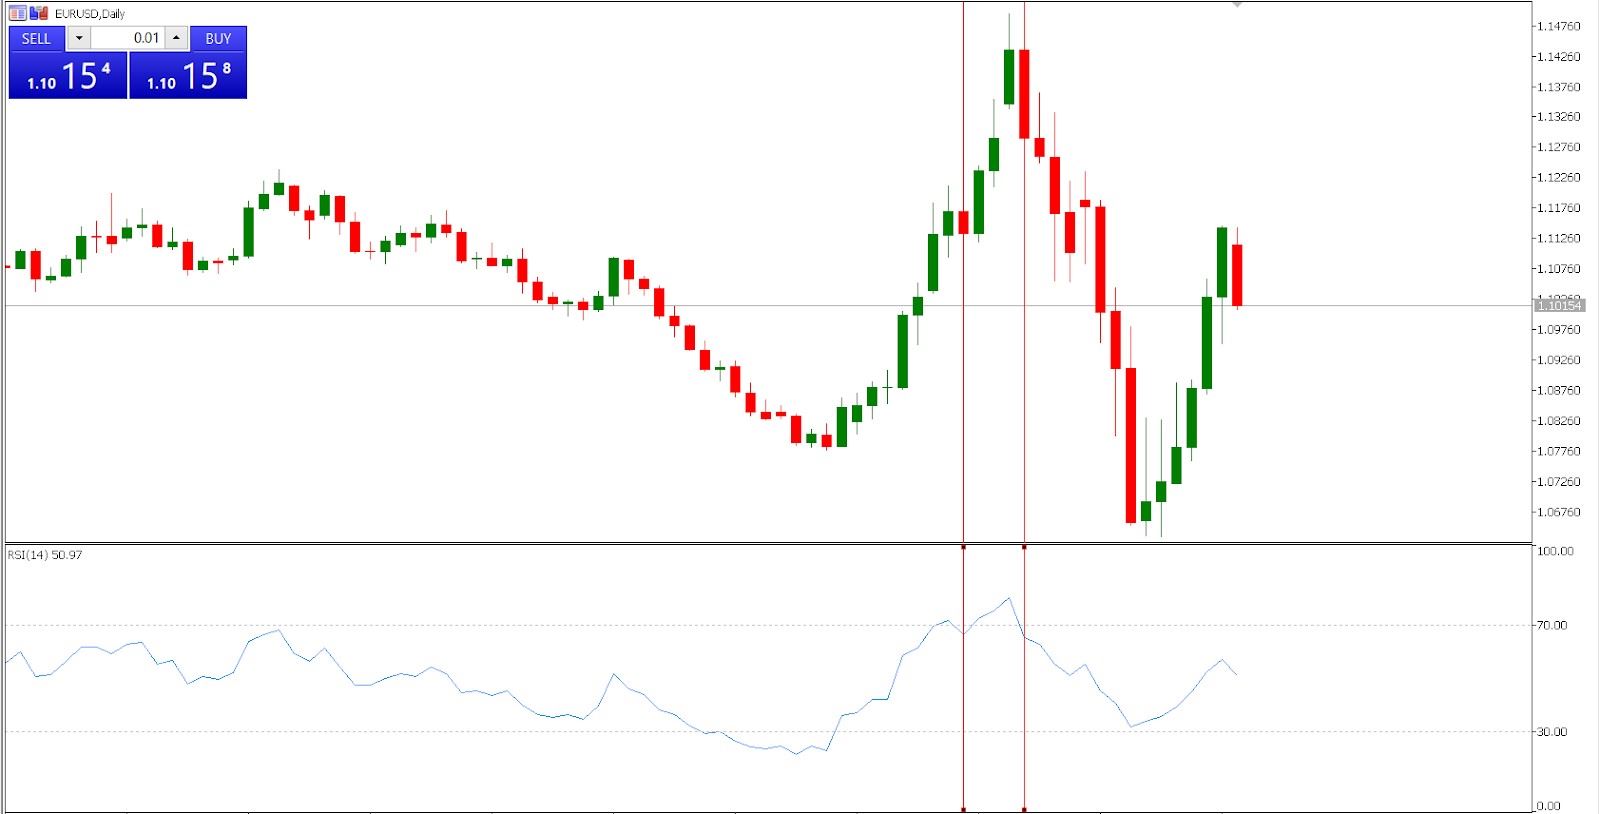 EUR/USD - overbought condition